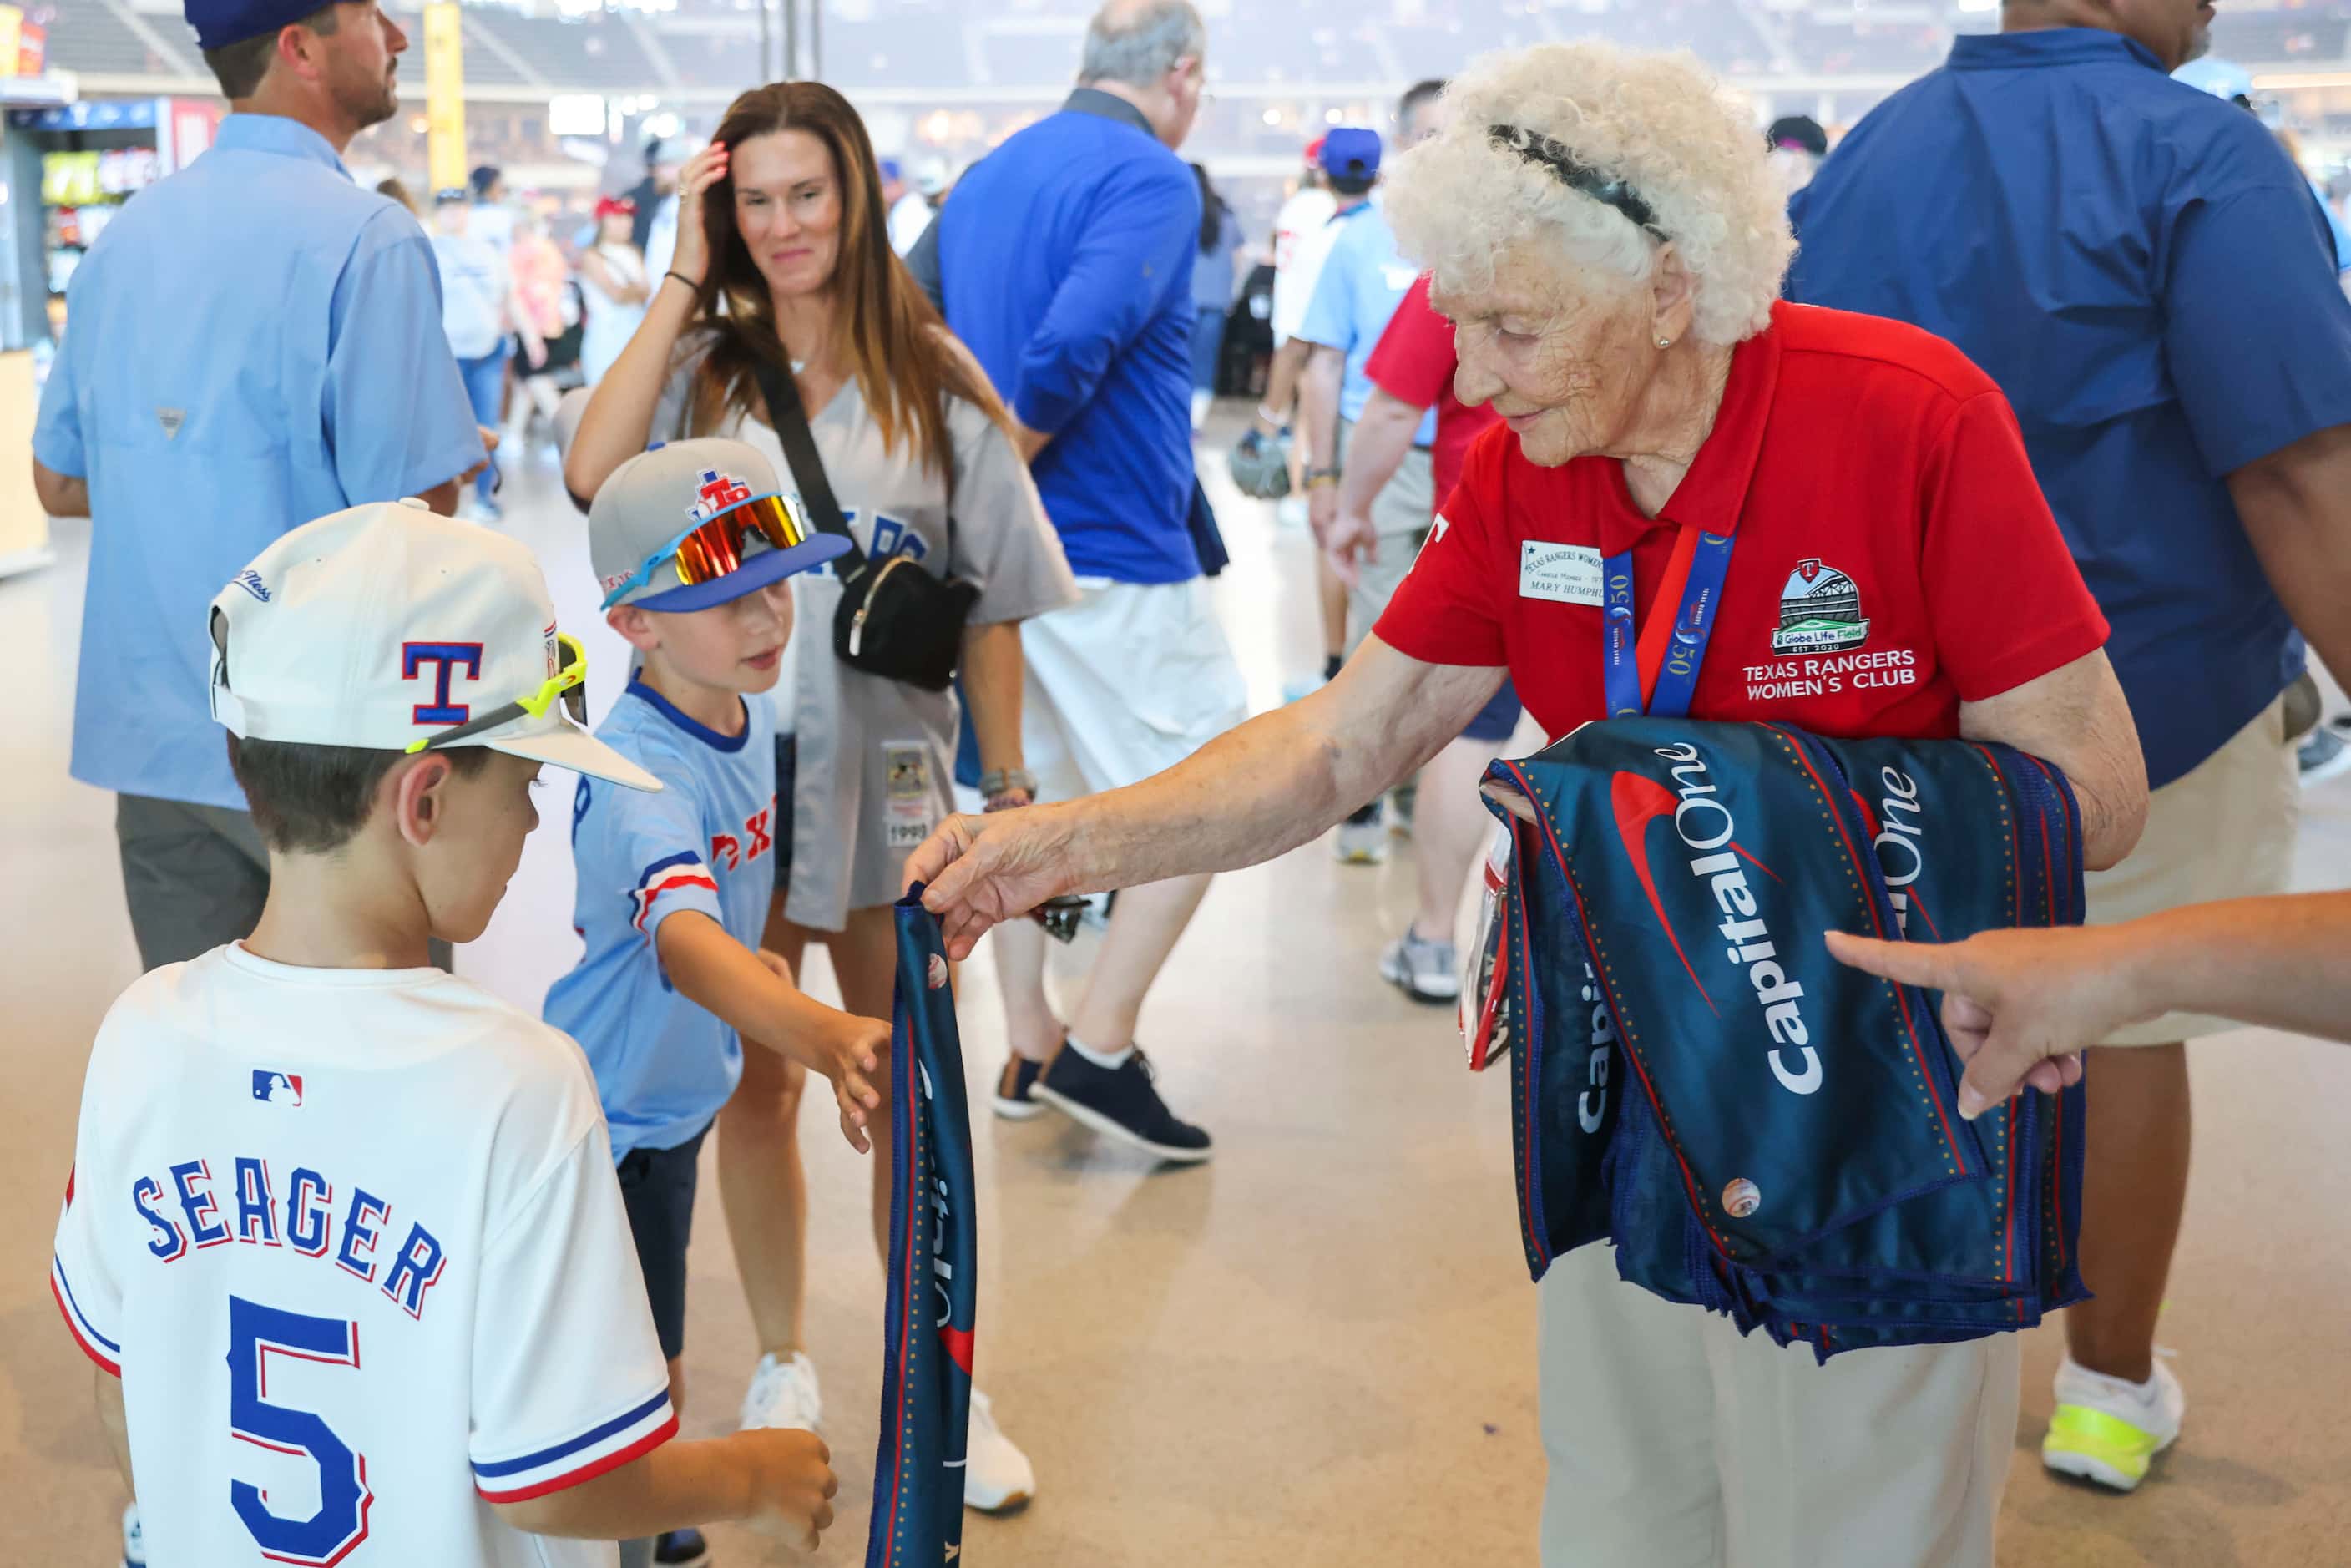 Texas Rangers Women’s Club member since 1974 Mary Humphus  hands out towels to the fans...